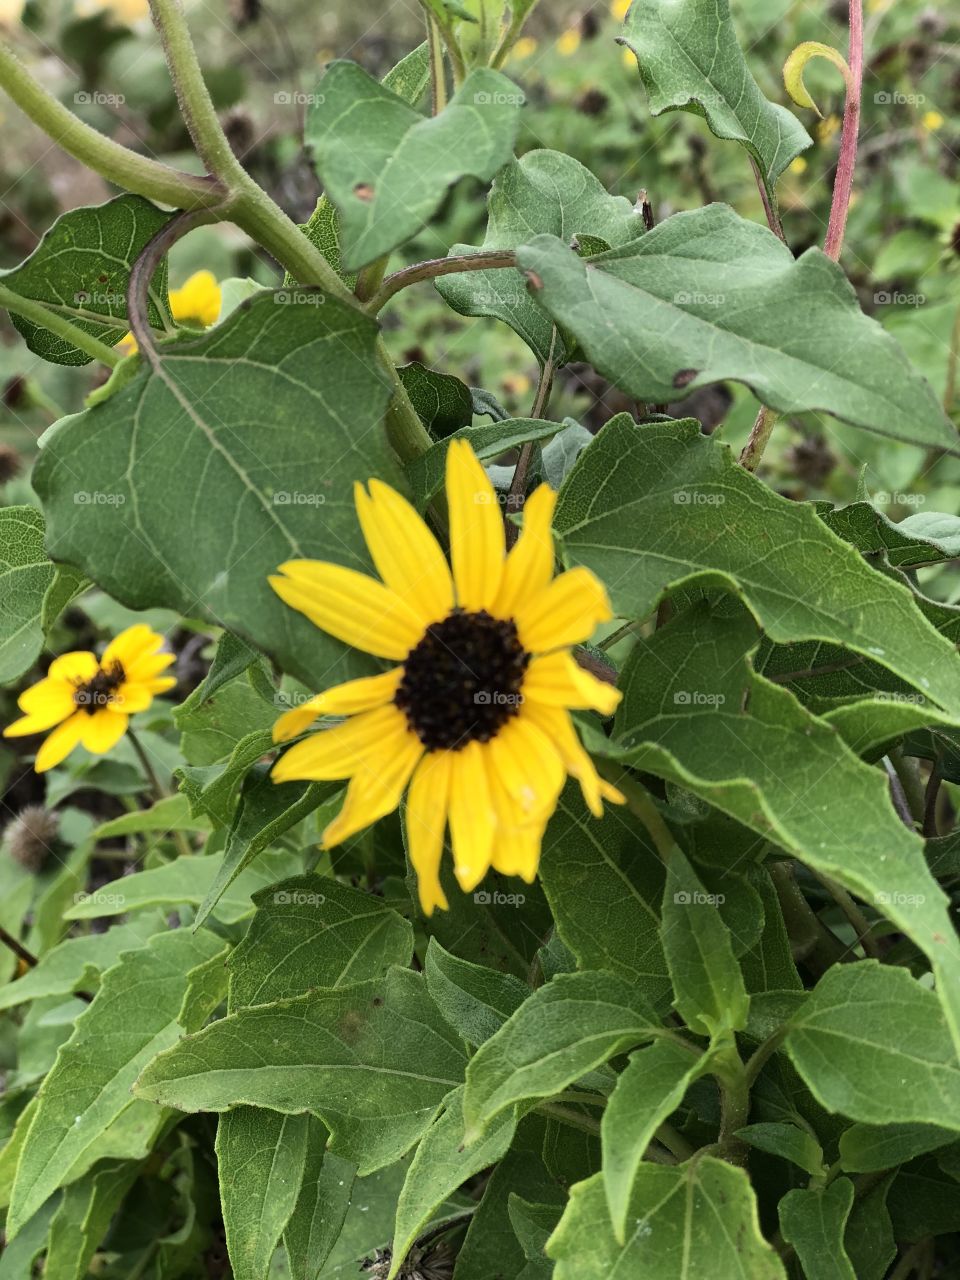 Sunflower surrounded by leafs